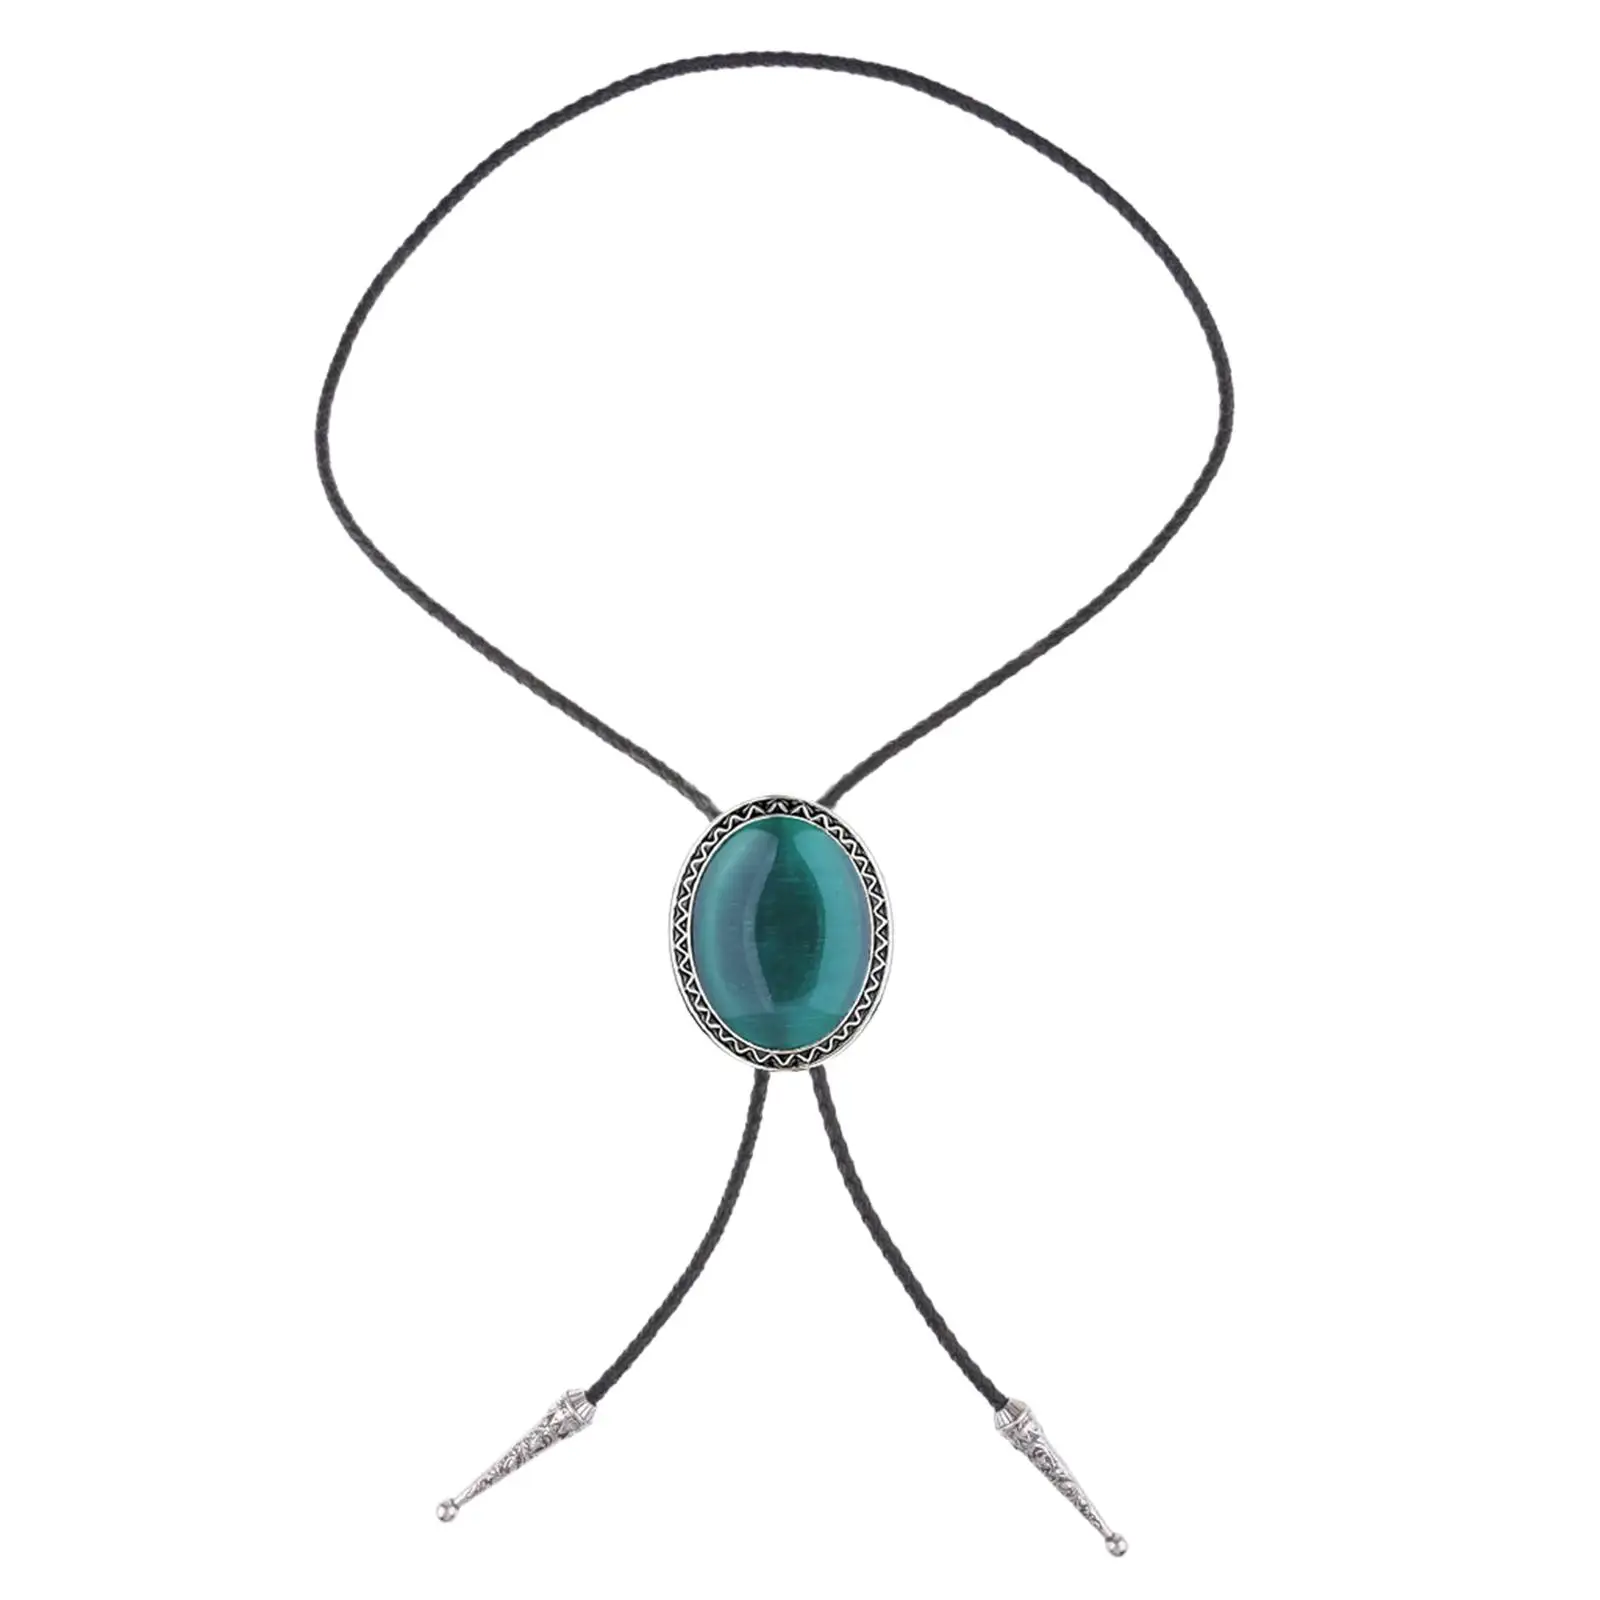 Fashion Bolo Tie, Pendant Creative Versatile Necklace Casual Clothing Accessory Necktie for Sweater Shirts suits Gift Hoodies